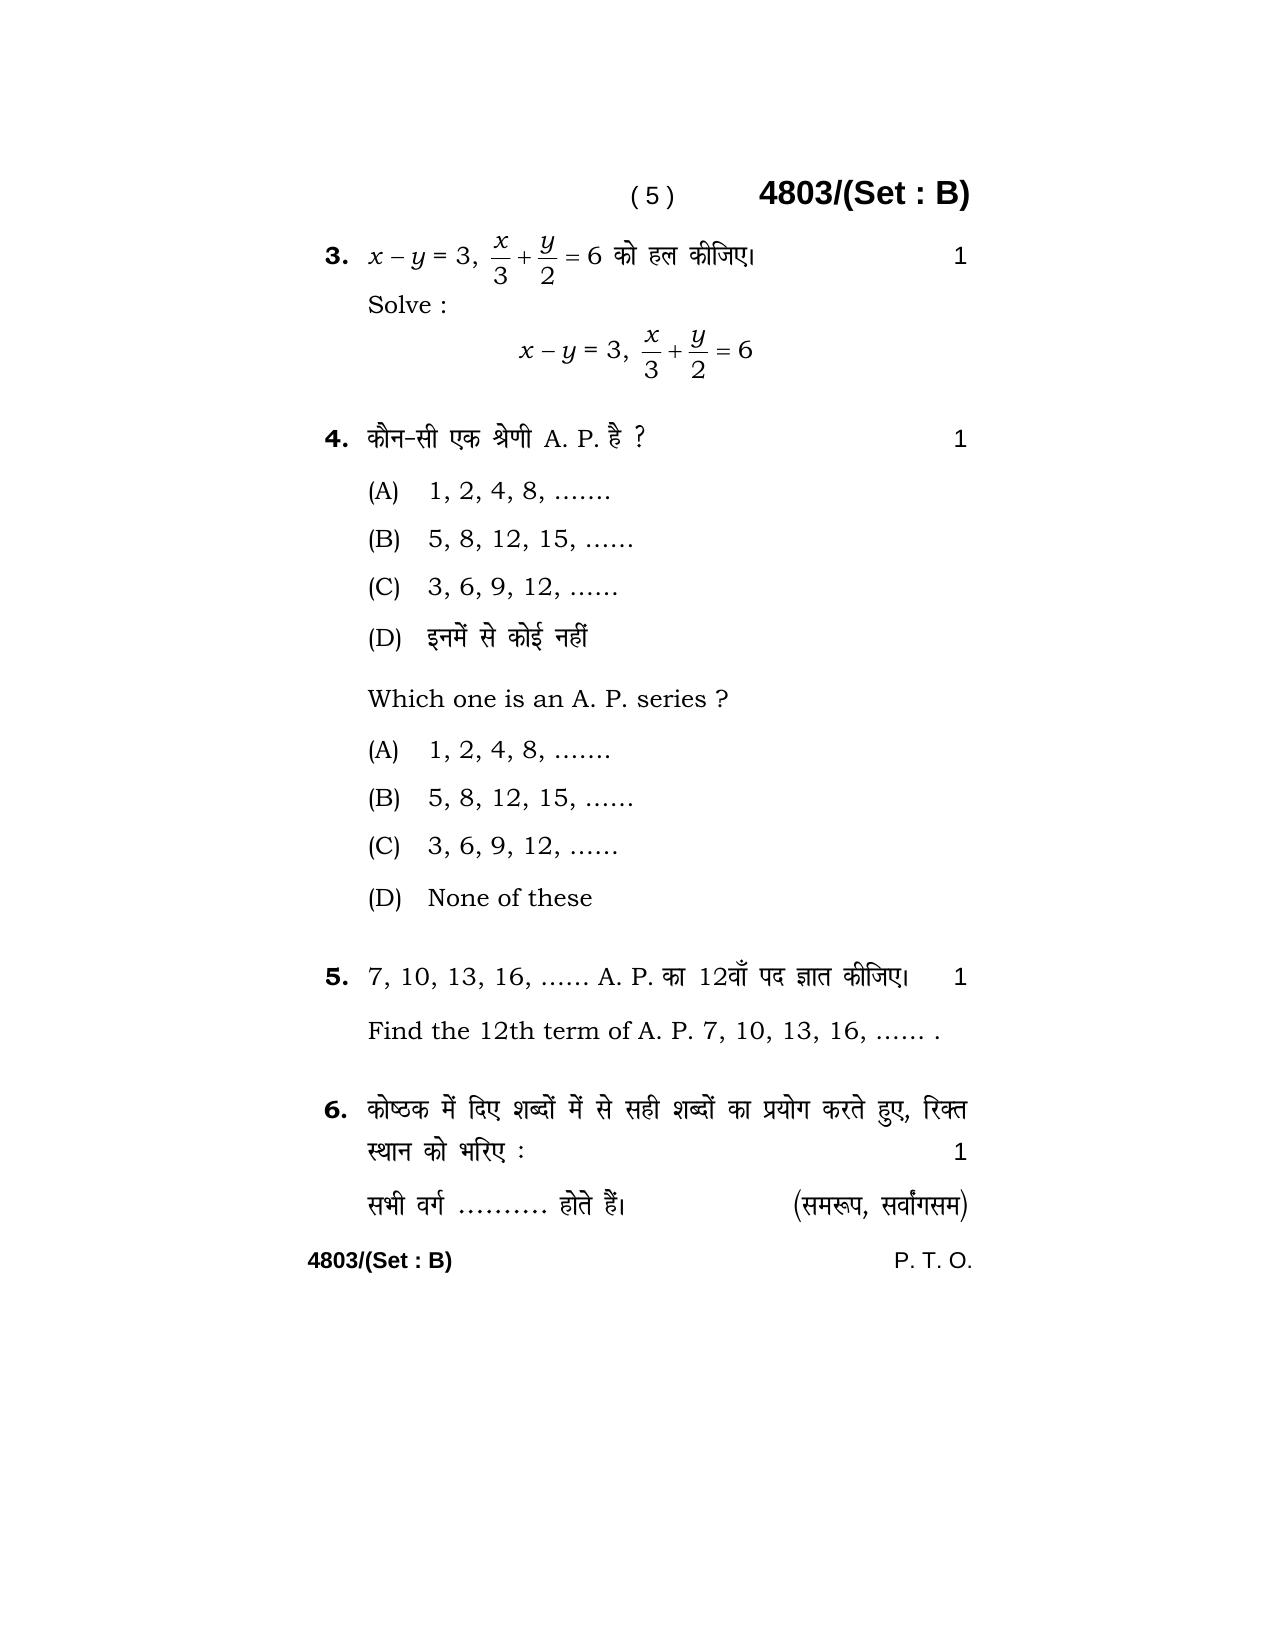 Haryana Board HBSE Class 10 Mathematics 2020 Question Paper - Page 21